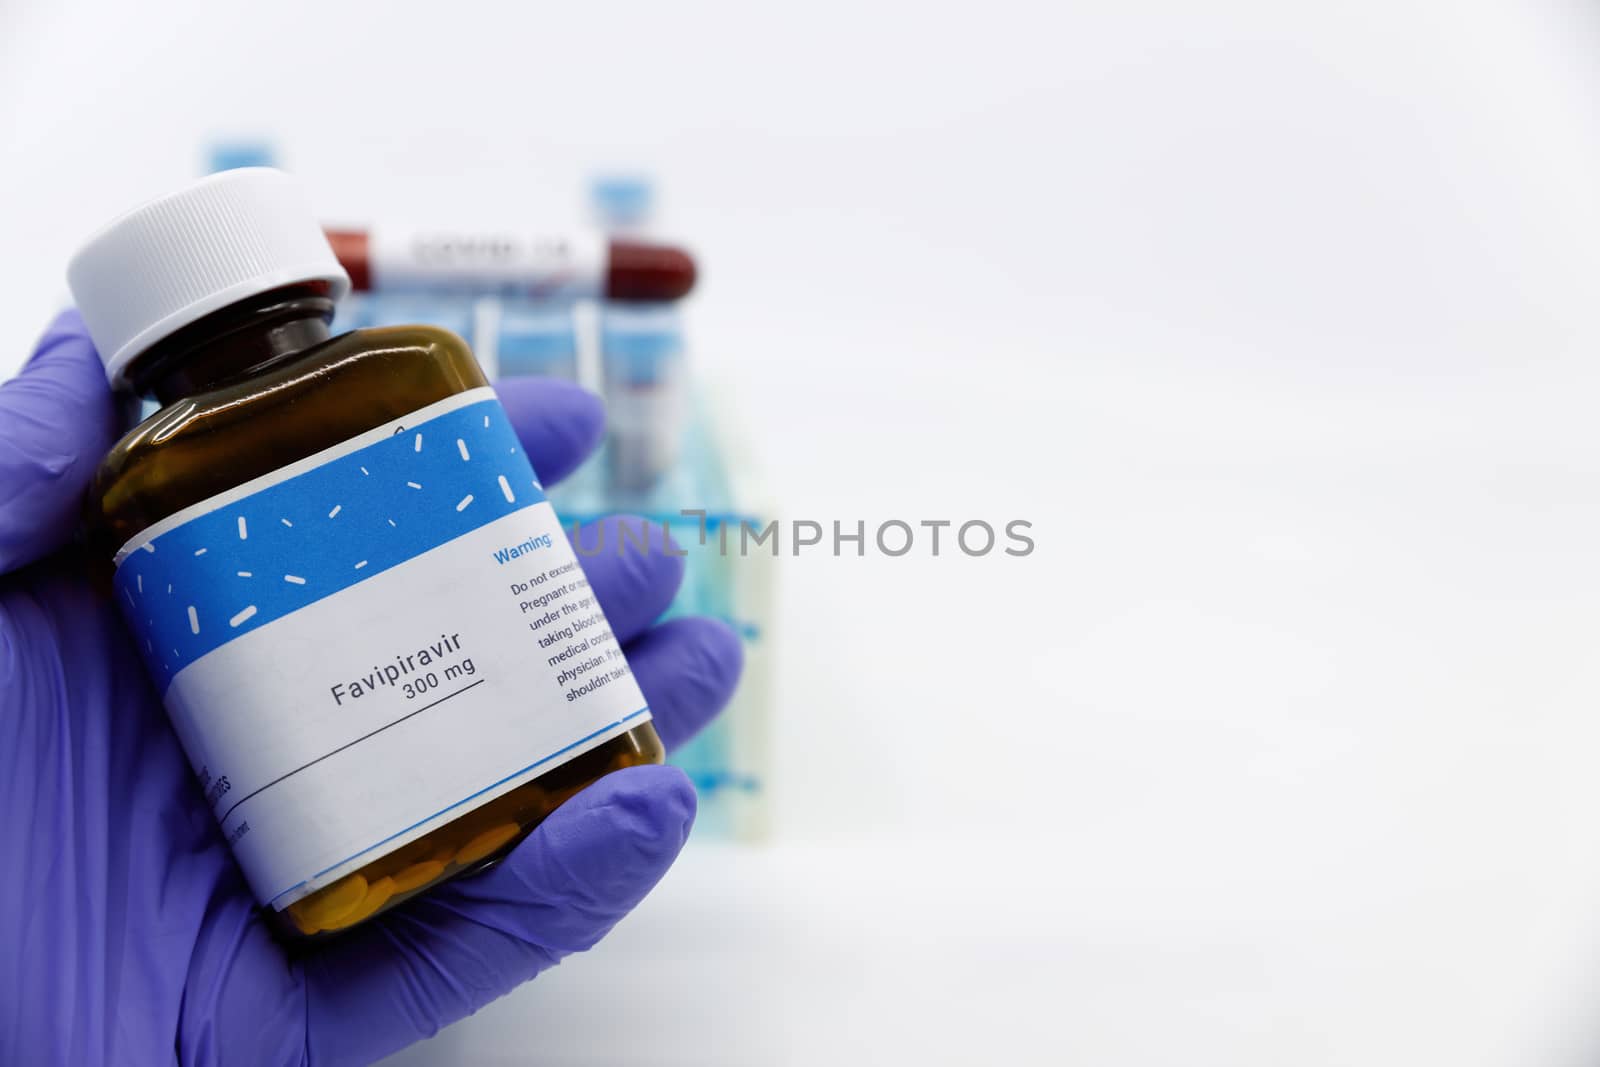 Dubai-UAE-Circa 2020:Doctor showing bottle of medicine for covid-19 treatment.Concept of Favipiravir medicine with blood tests tubes on the background.Cure for coronavirus,COVID-19 treatment. by dugulan